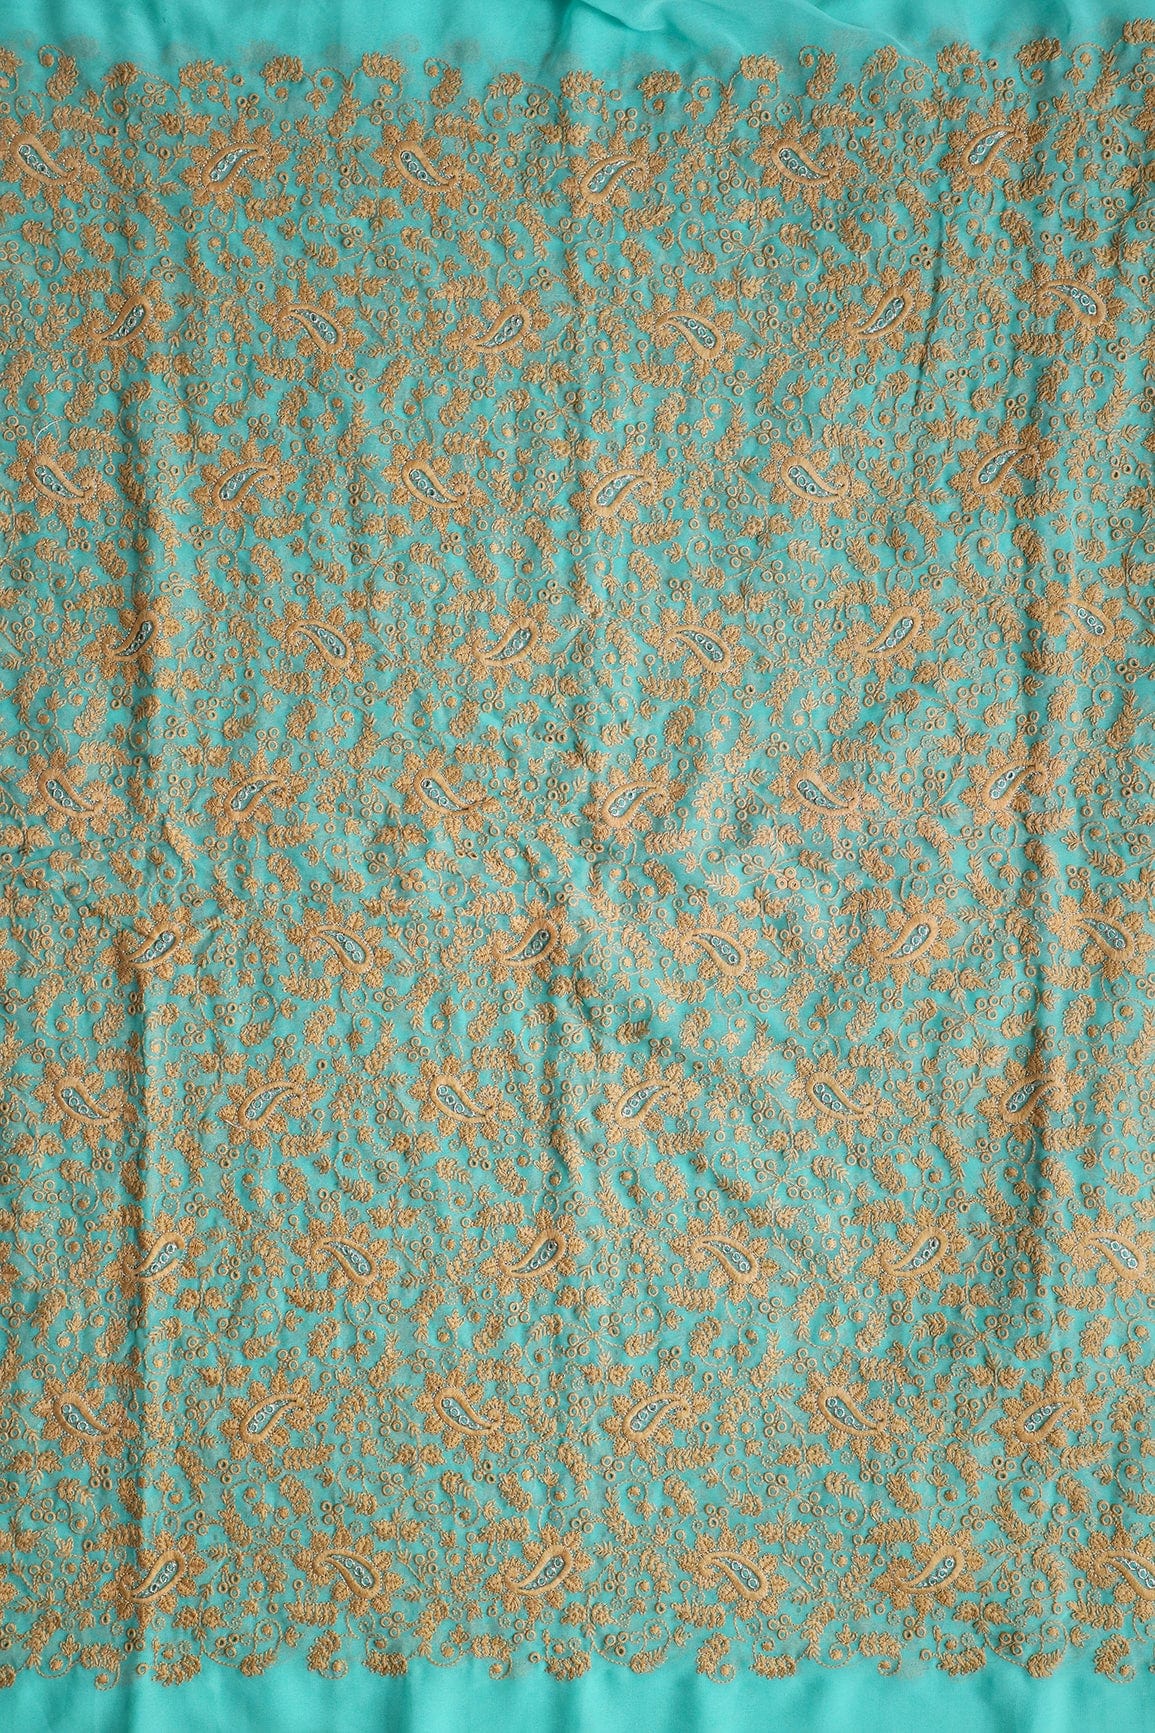 doeraa Embroidery Fabrics 3.25 Meter Cut Piece Of Beige Thread Paisley Embroidery On Sky Blue Viscose Georgette Fabric